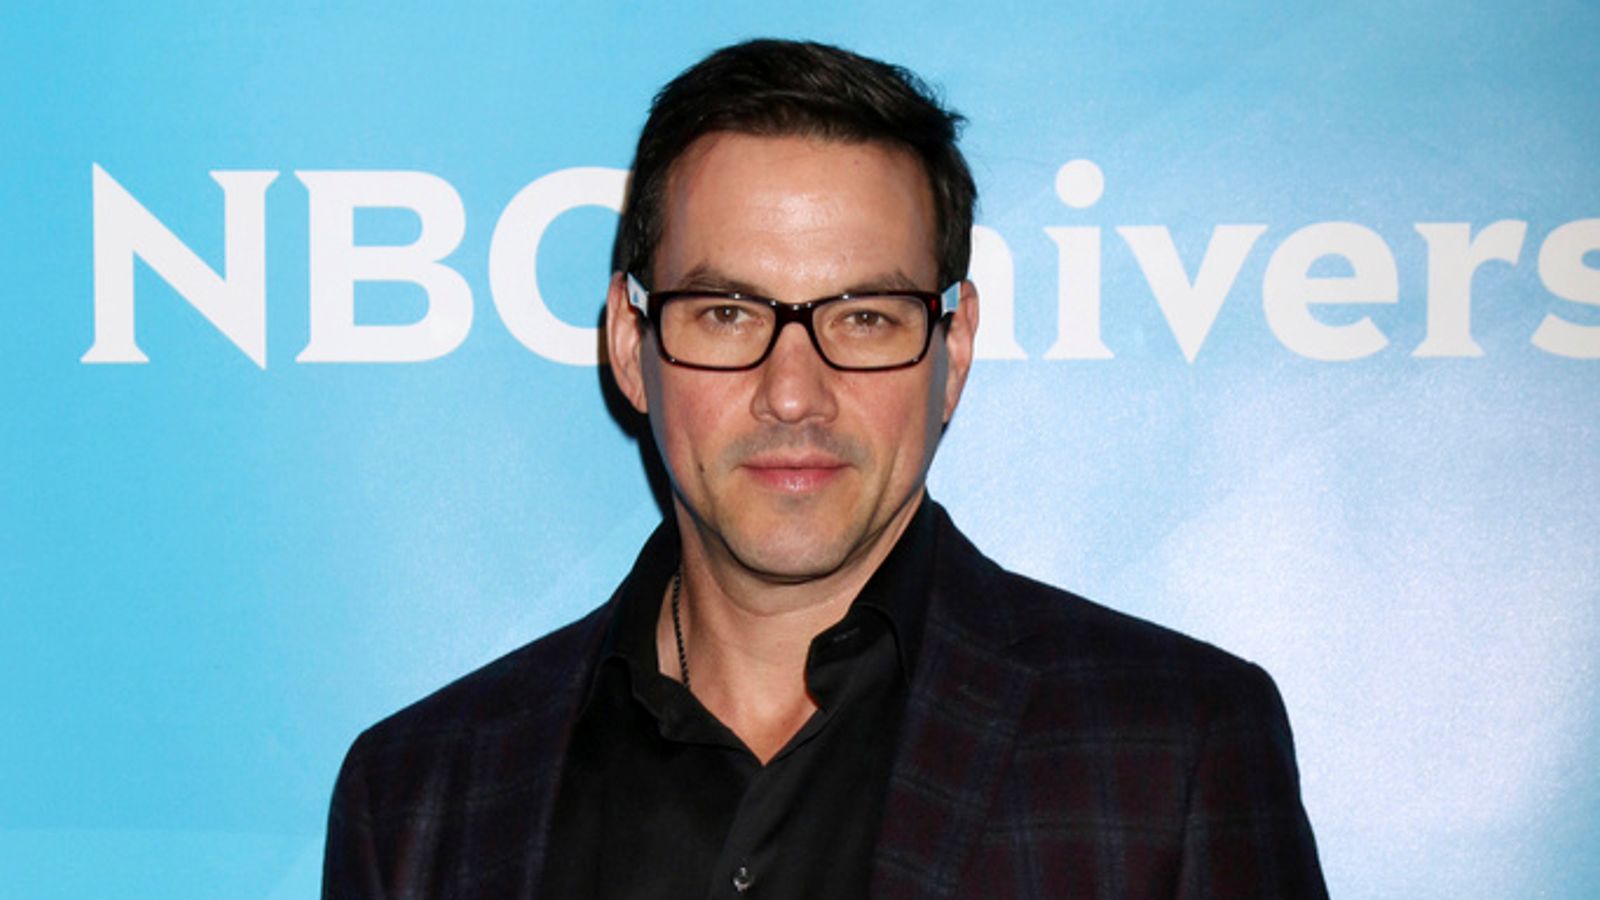 Tyler Christopher, Days Of Our Lives actor and ex-husband of Eva Longoria, dies at 50